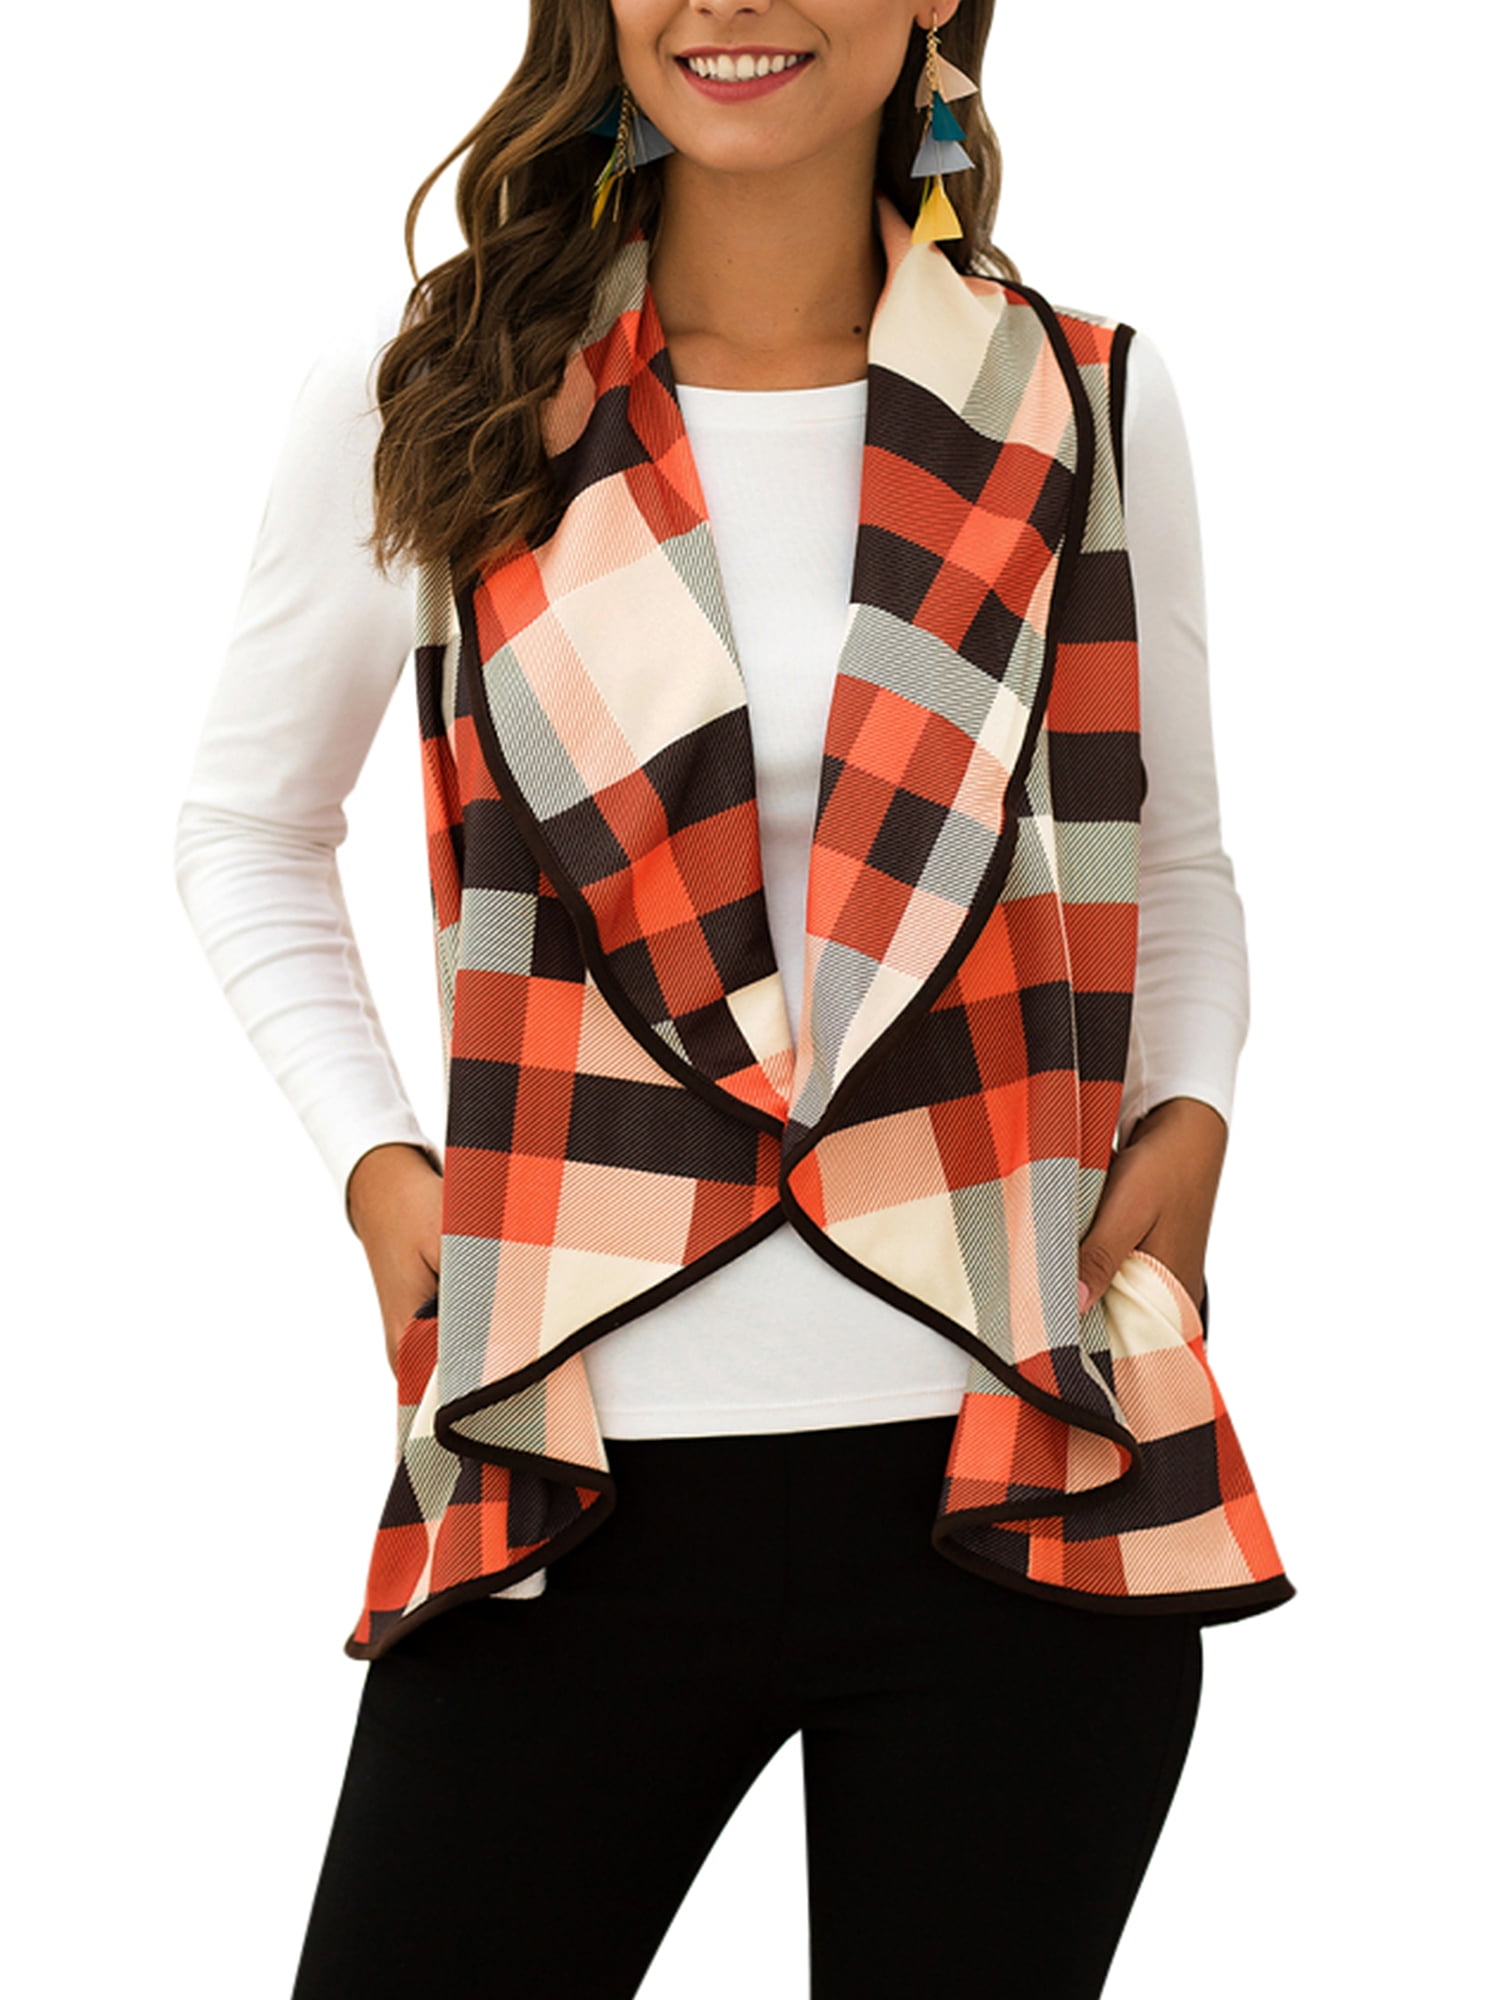 F_Gotal Womens Warm Color Block Plaid Zip Up Vest Sleeveless Lightweight Cardigan Jacket Outwear with Pockets 